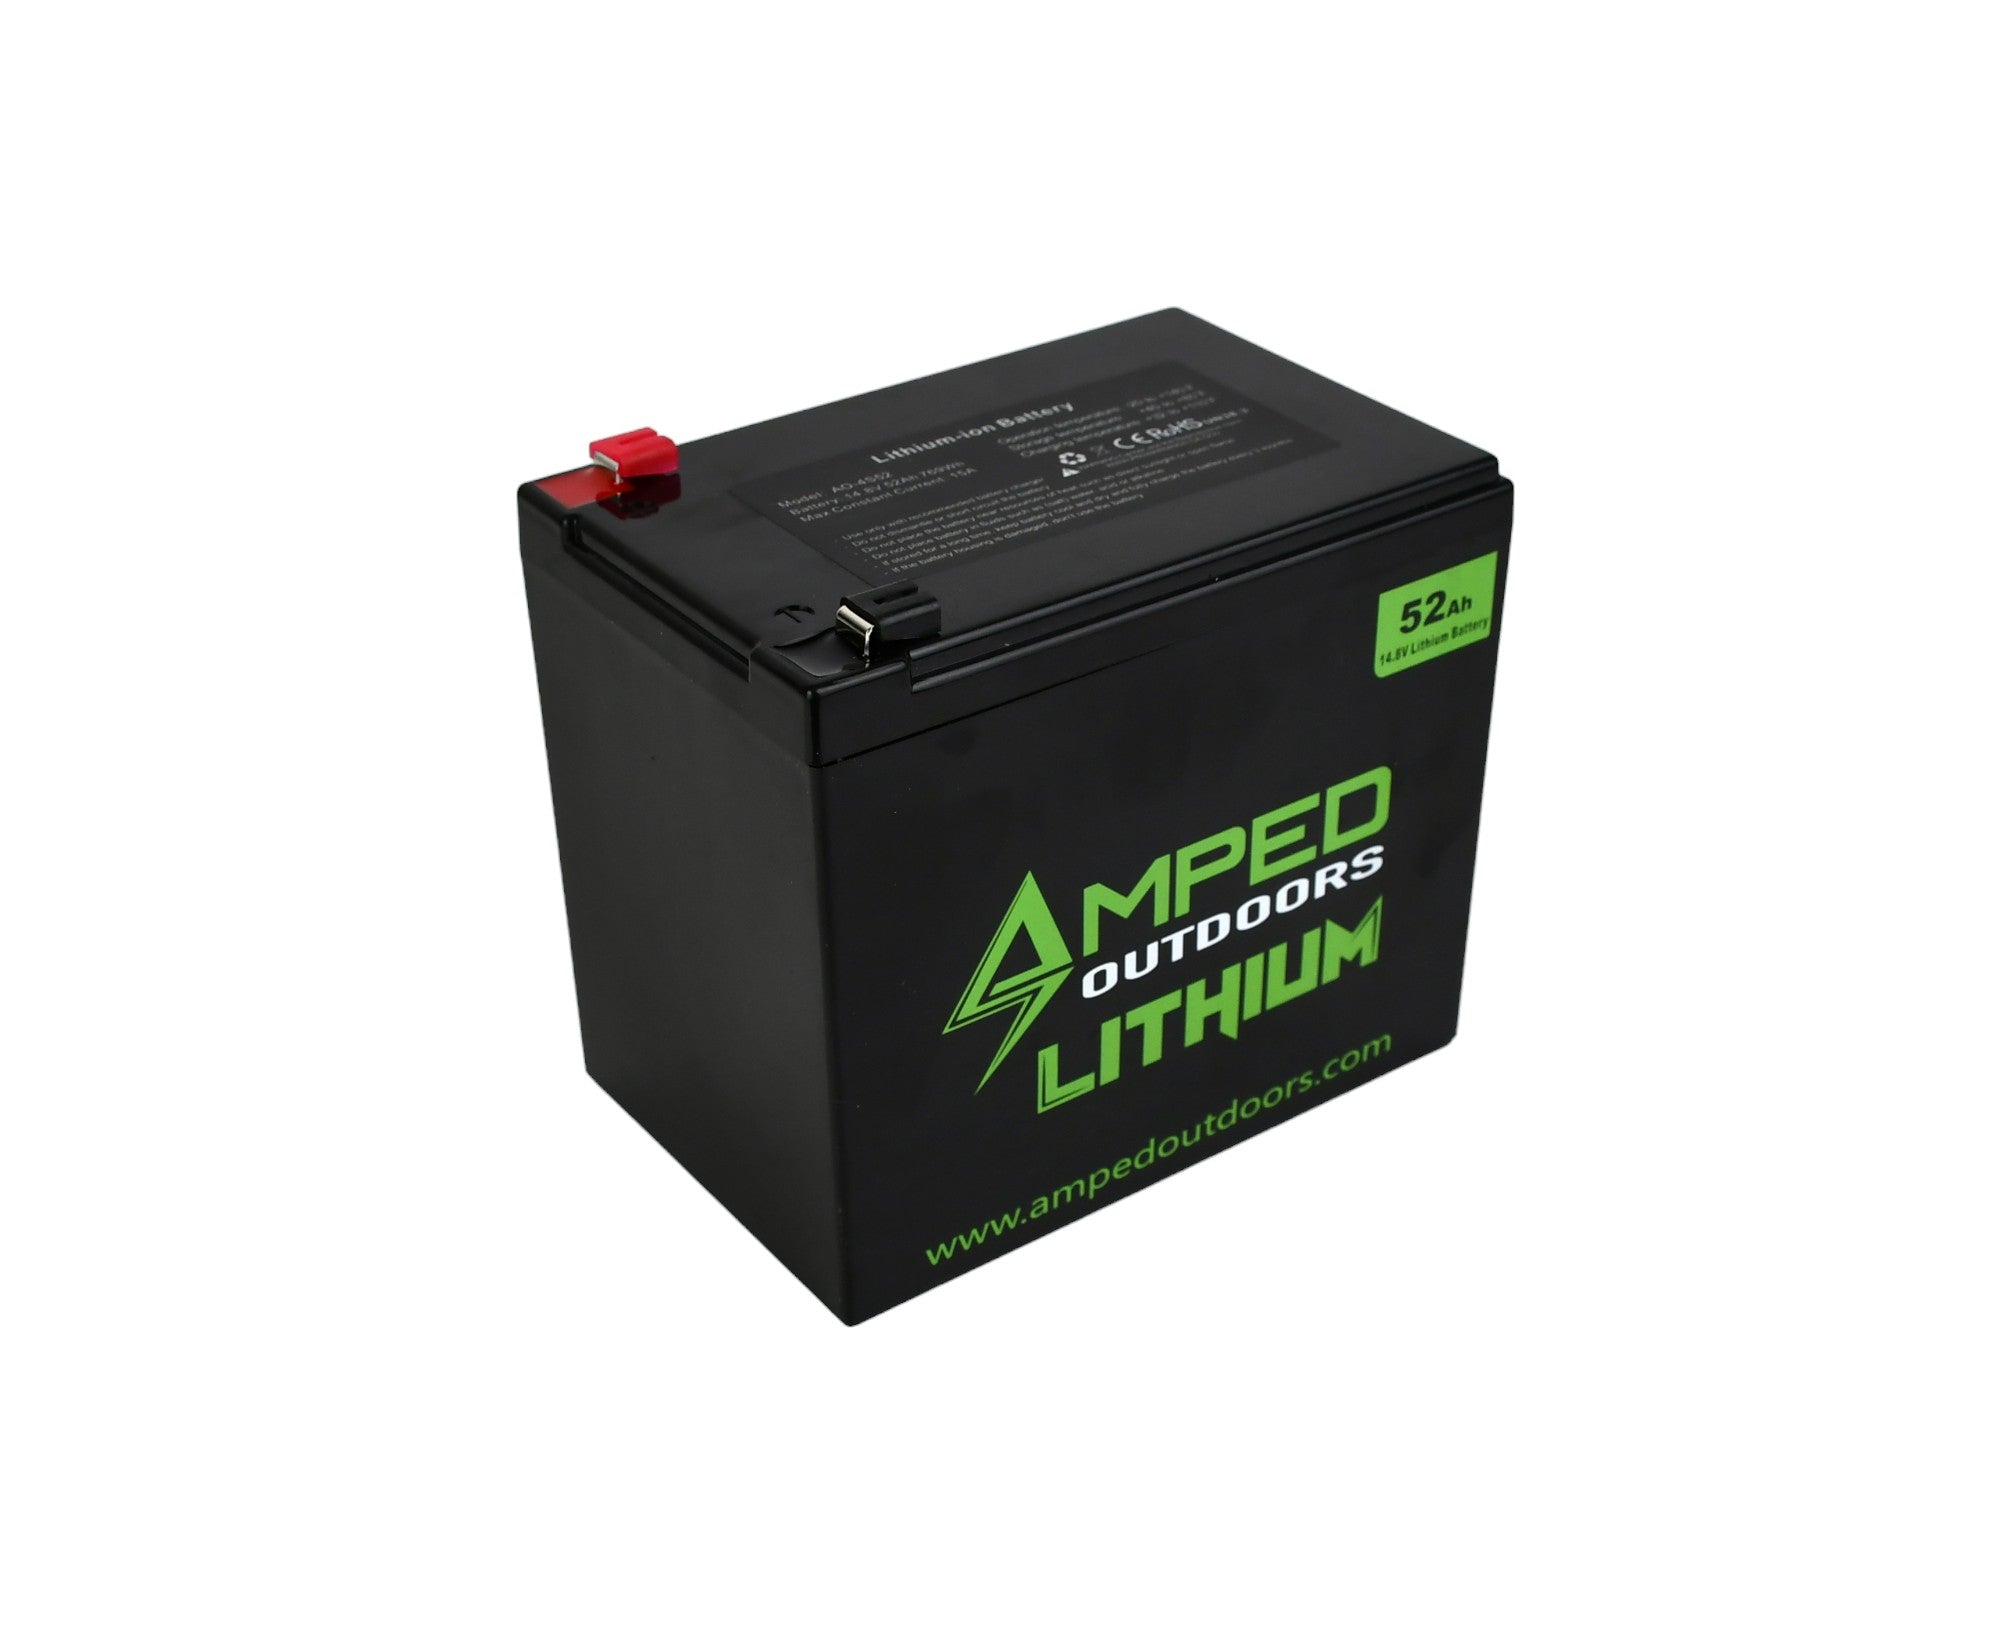 Amped Outdoors 12V 100AH Lithium-iron (LiFePO4) High Performance Batte –  Van Life Suppliers